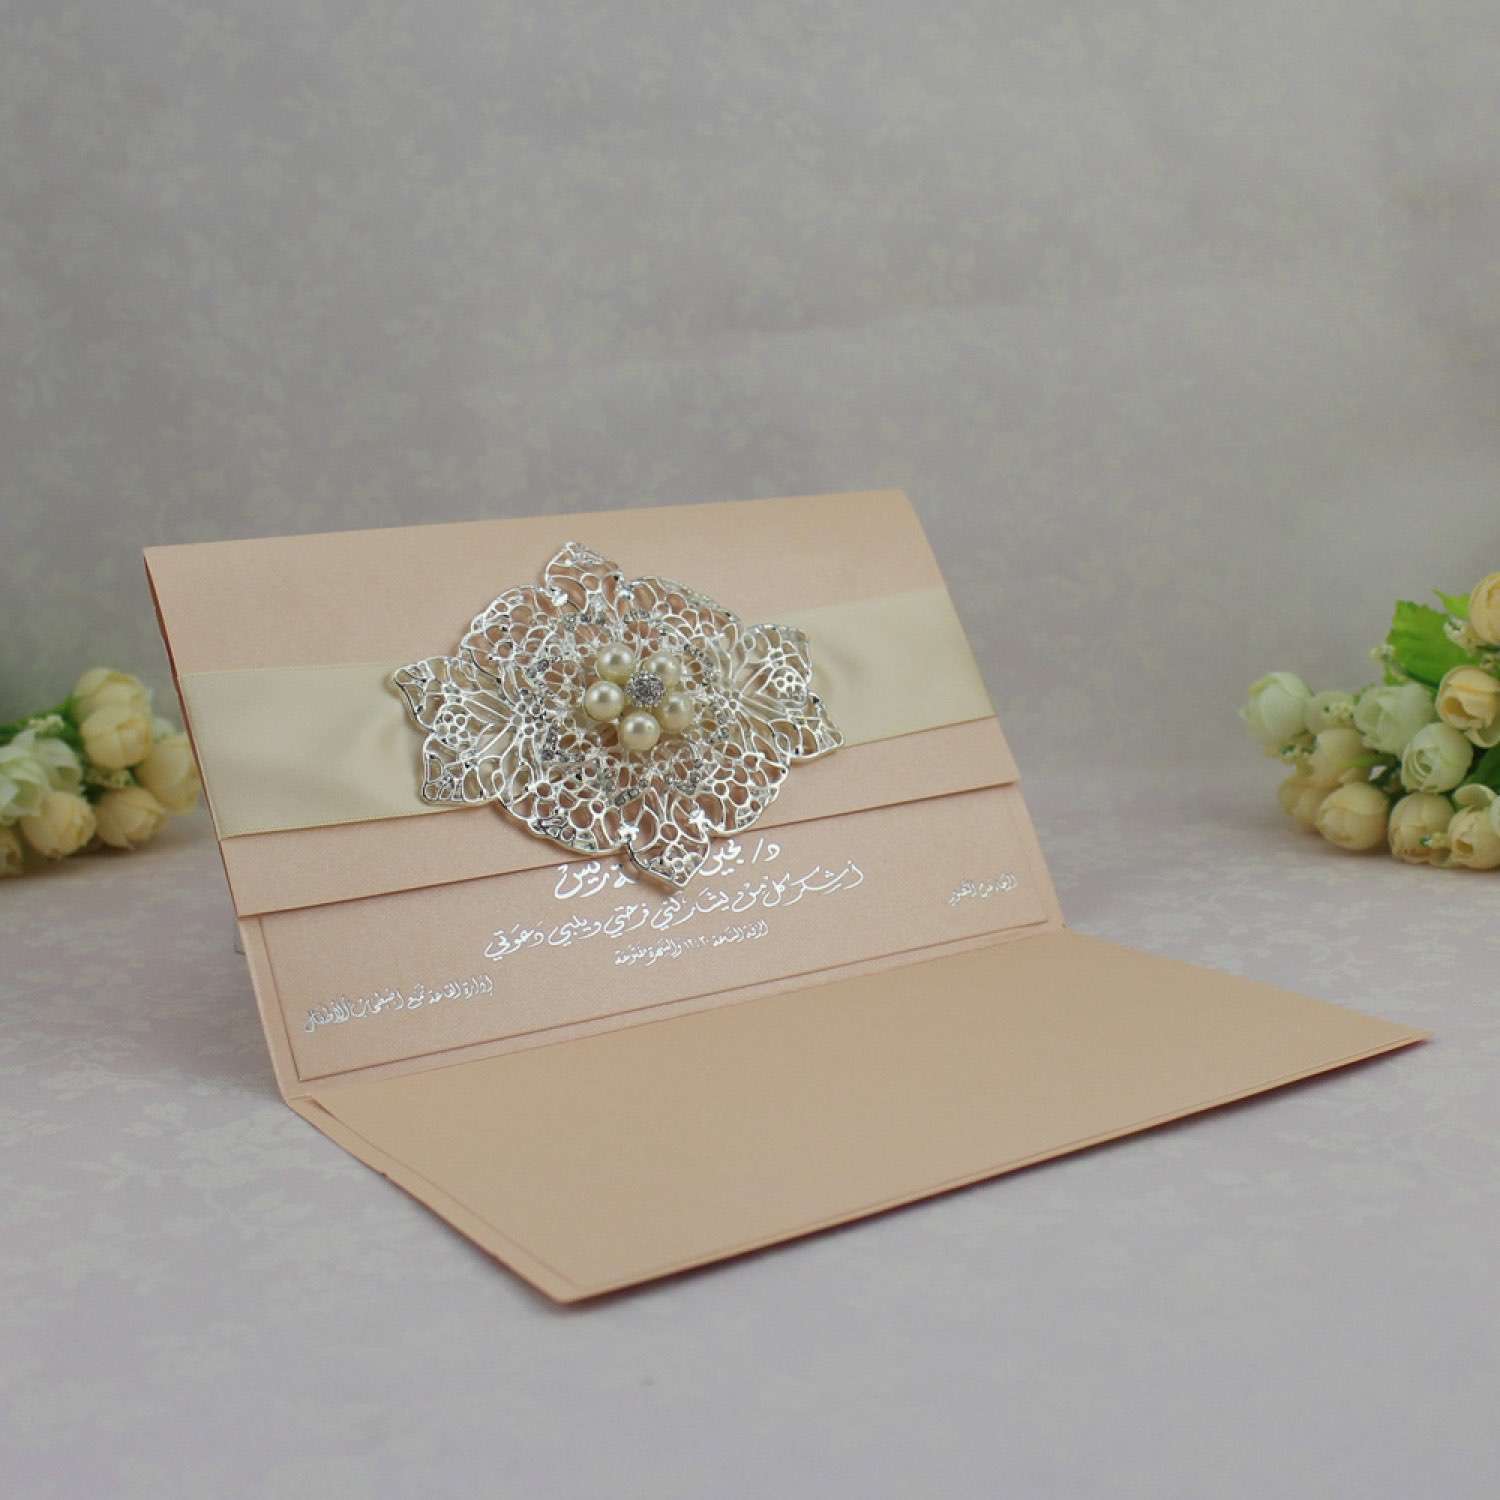 Invitation Card with Buckle Decoration Foil Printing Customized Wedding Invites Reception Card 